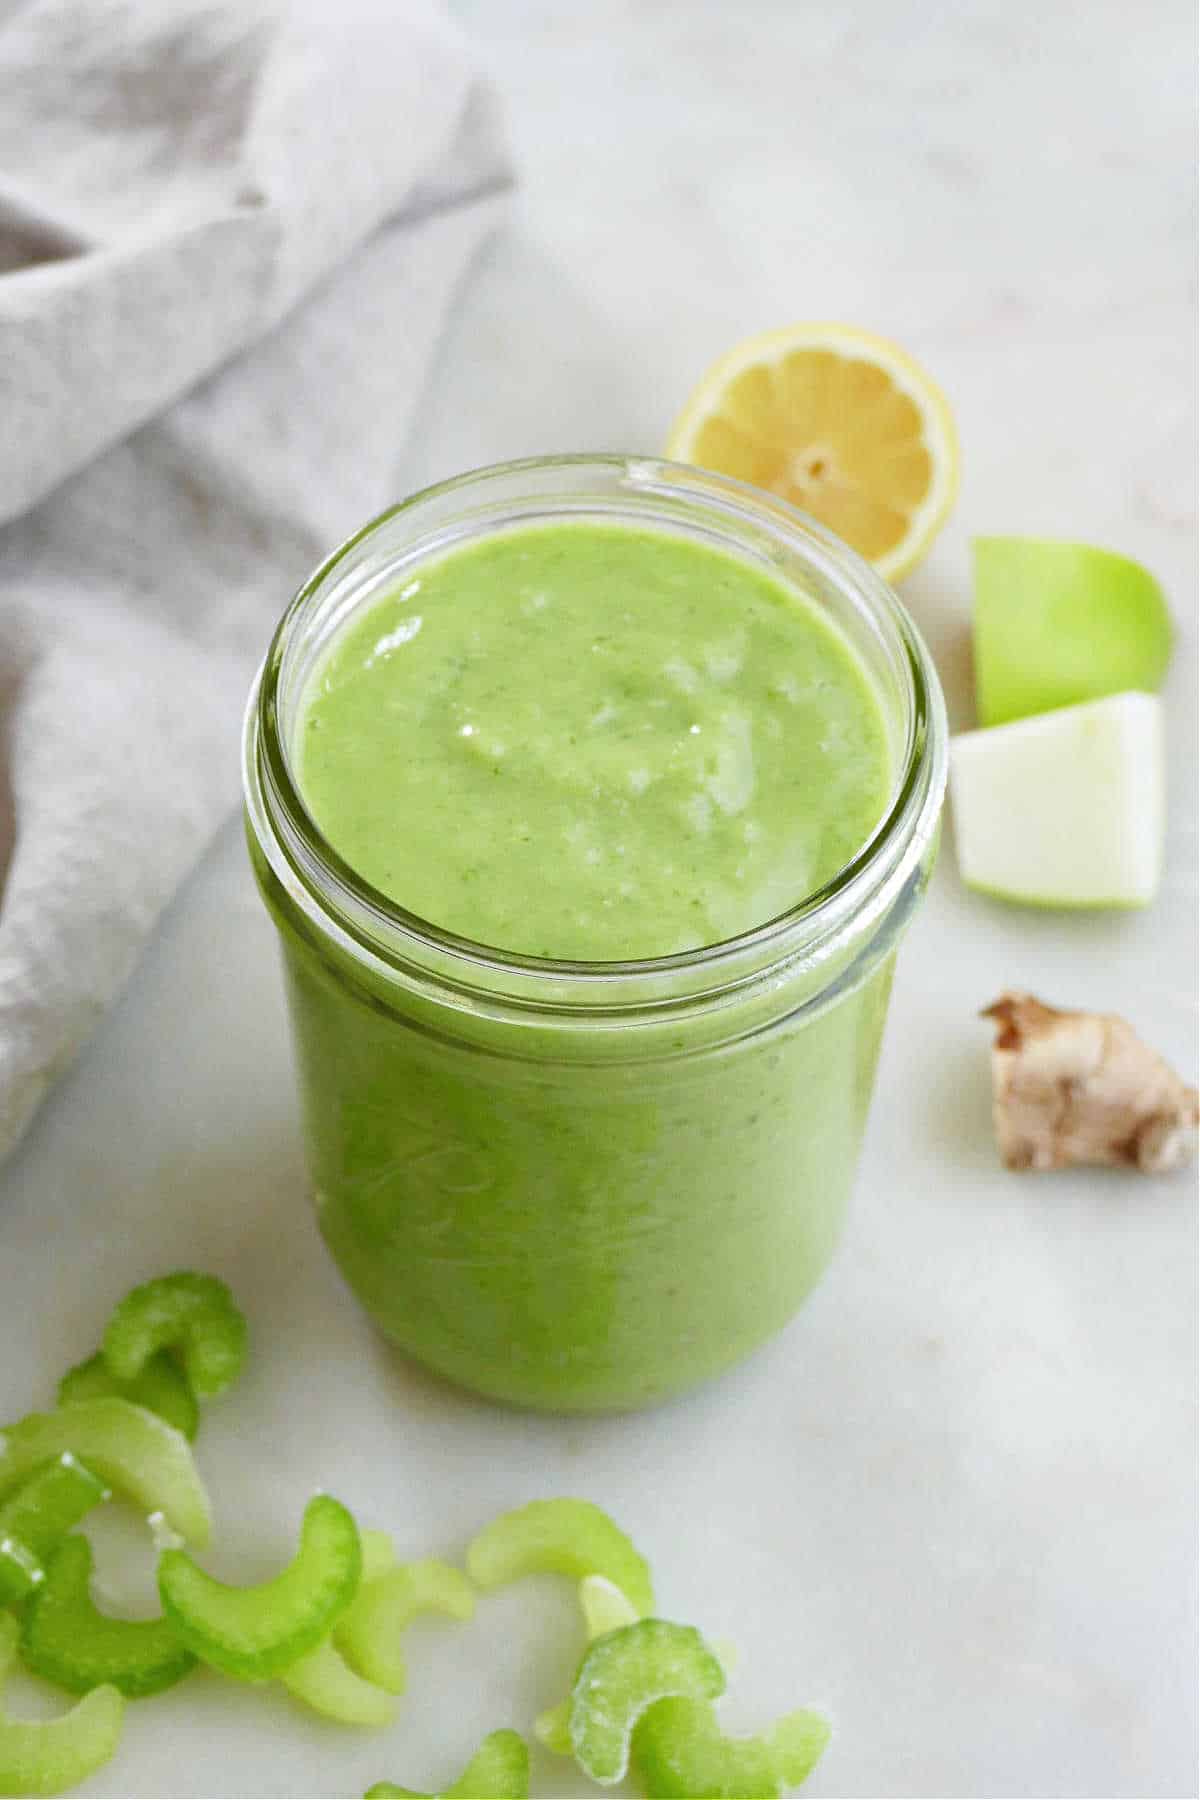 green smoothie made from celery in glass jar on a counter